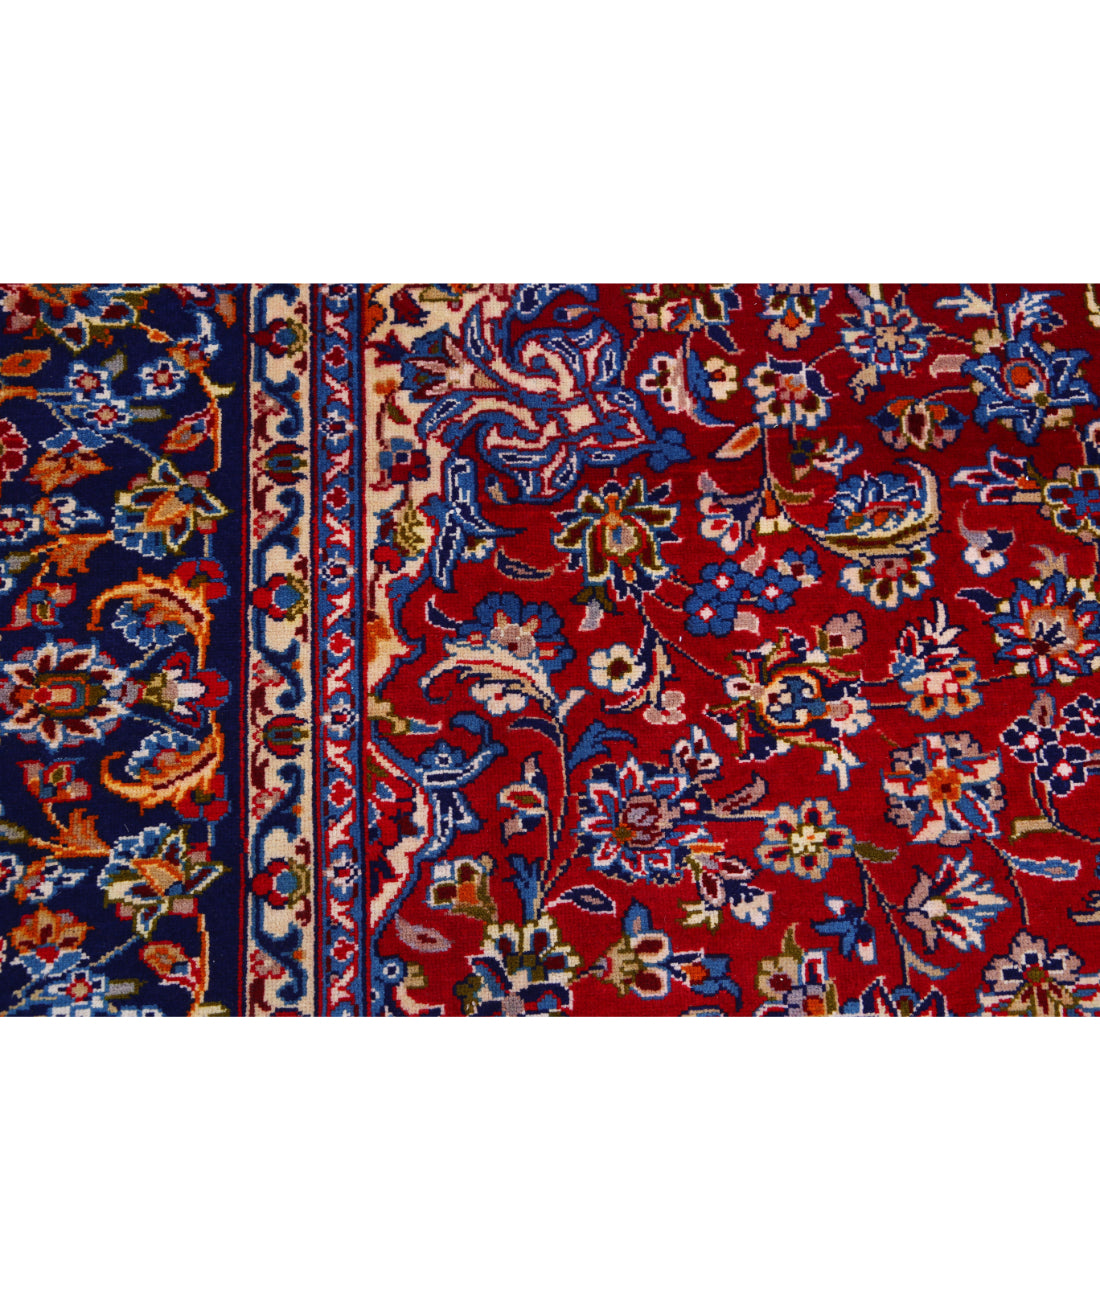 Hand Knotted Persian Kashan Wool Rug - 8'0'' x 12'0'' 8'0'' x 12'0'' (240 X 360) / Red / Blue